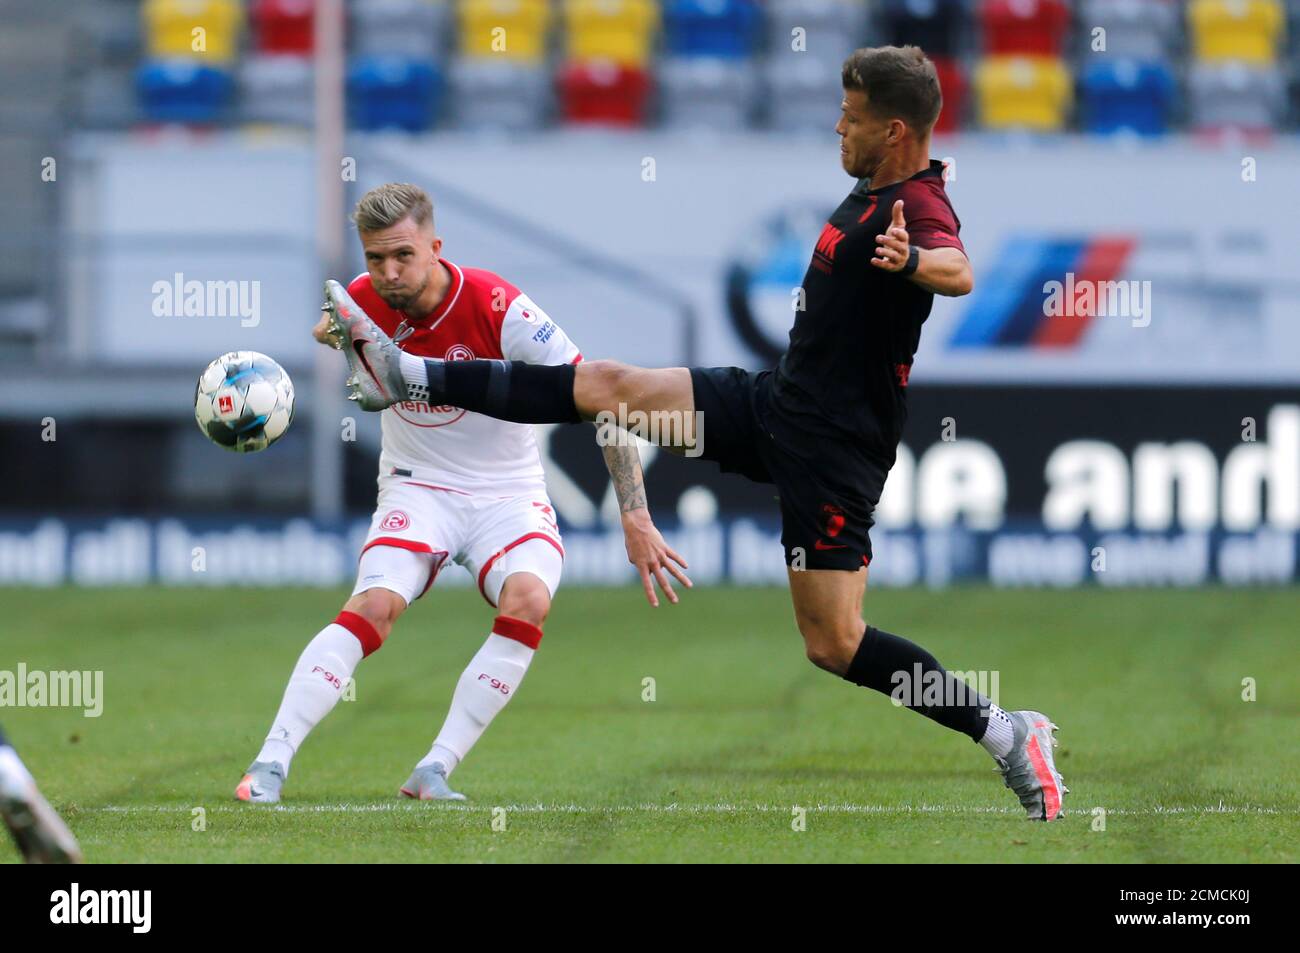 Soccer Football - Bundesliga - Fortuna Dusseldorf v FC Augsburg - Merkur Spiel-Arena, Dusseldorf, Germany - June 20, 2020  Fortuna Dusseldorf's Andre Hoffmann in action with FC Augsburg's Florian Niederlechner, following the resumption of play behind closed doors after the outbreak of the coronavirus disease (COVID-19)   REUTERS/Leon Kuegeler/Pool    DFL regulations prohibit any use of photographs as image sequences and/or quasi-video Stock Photo